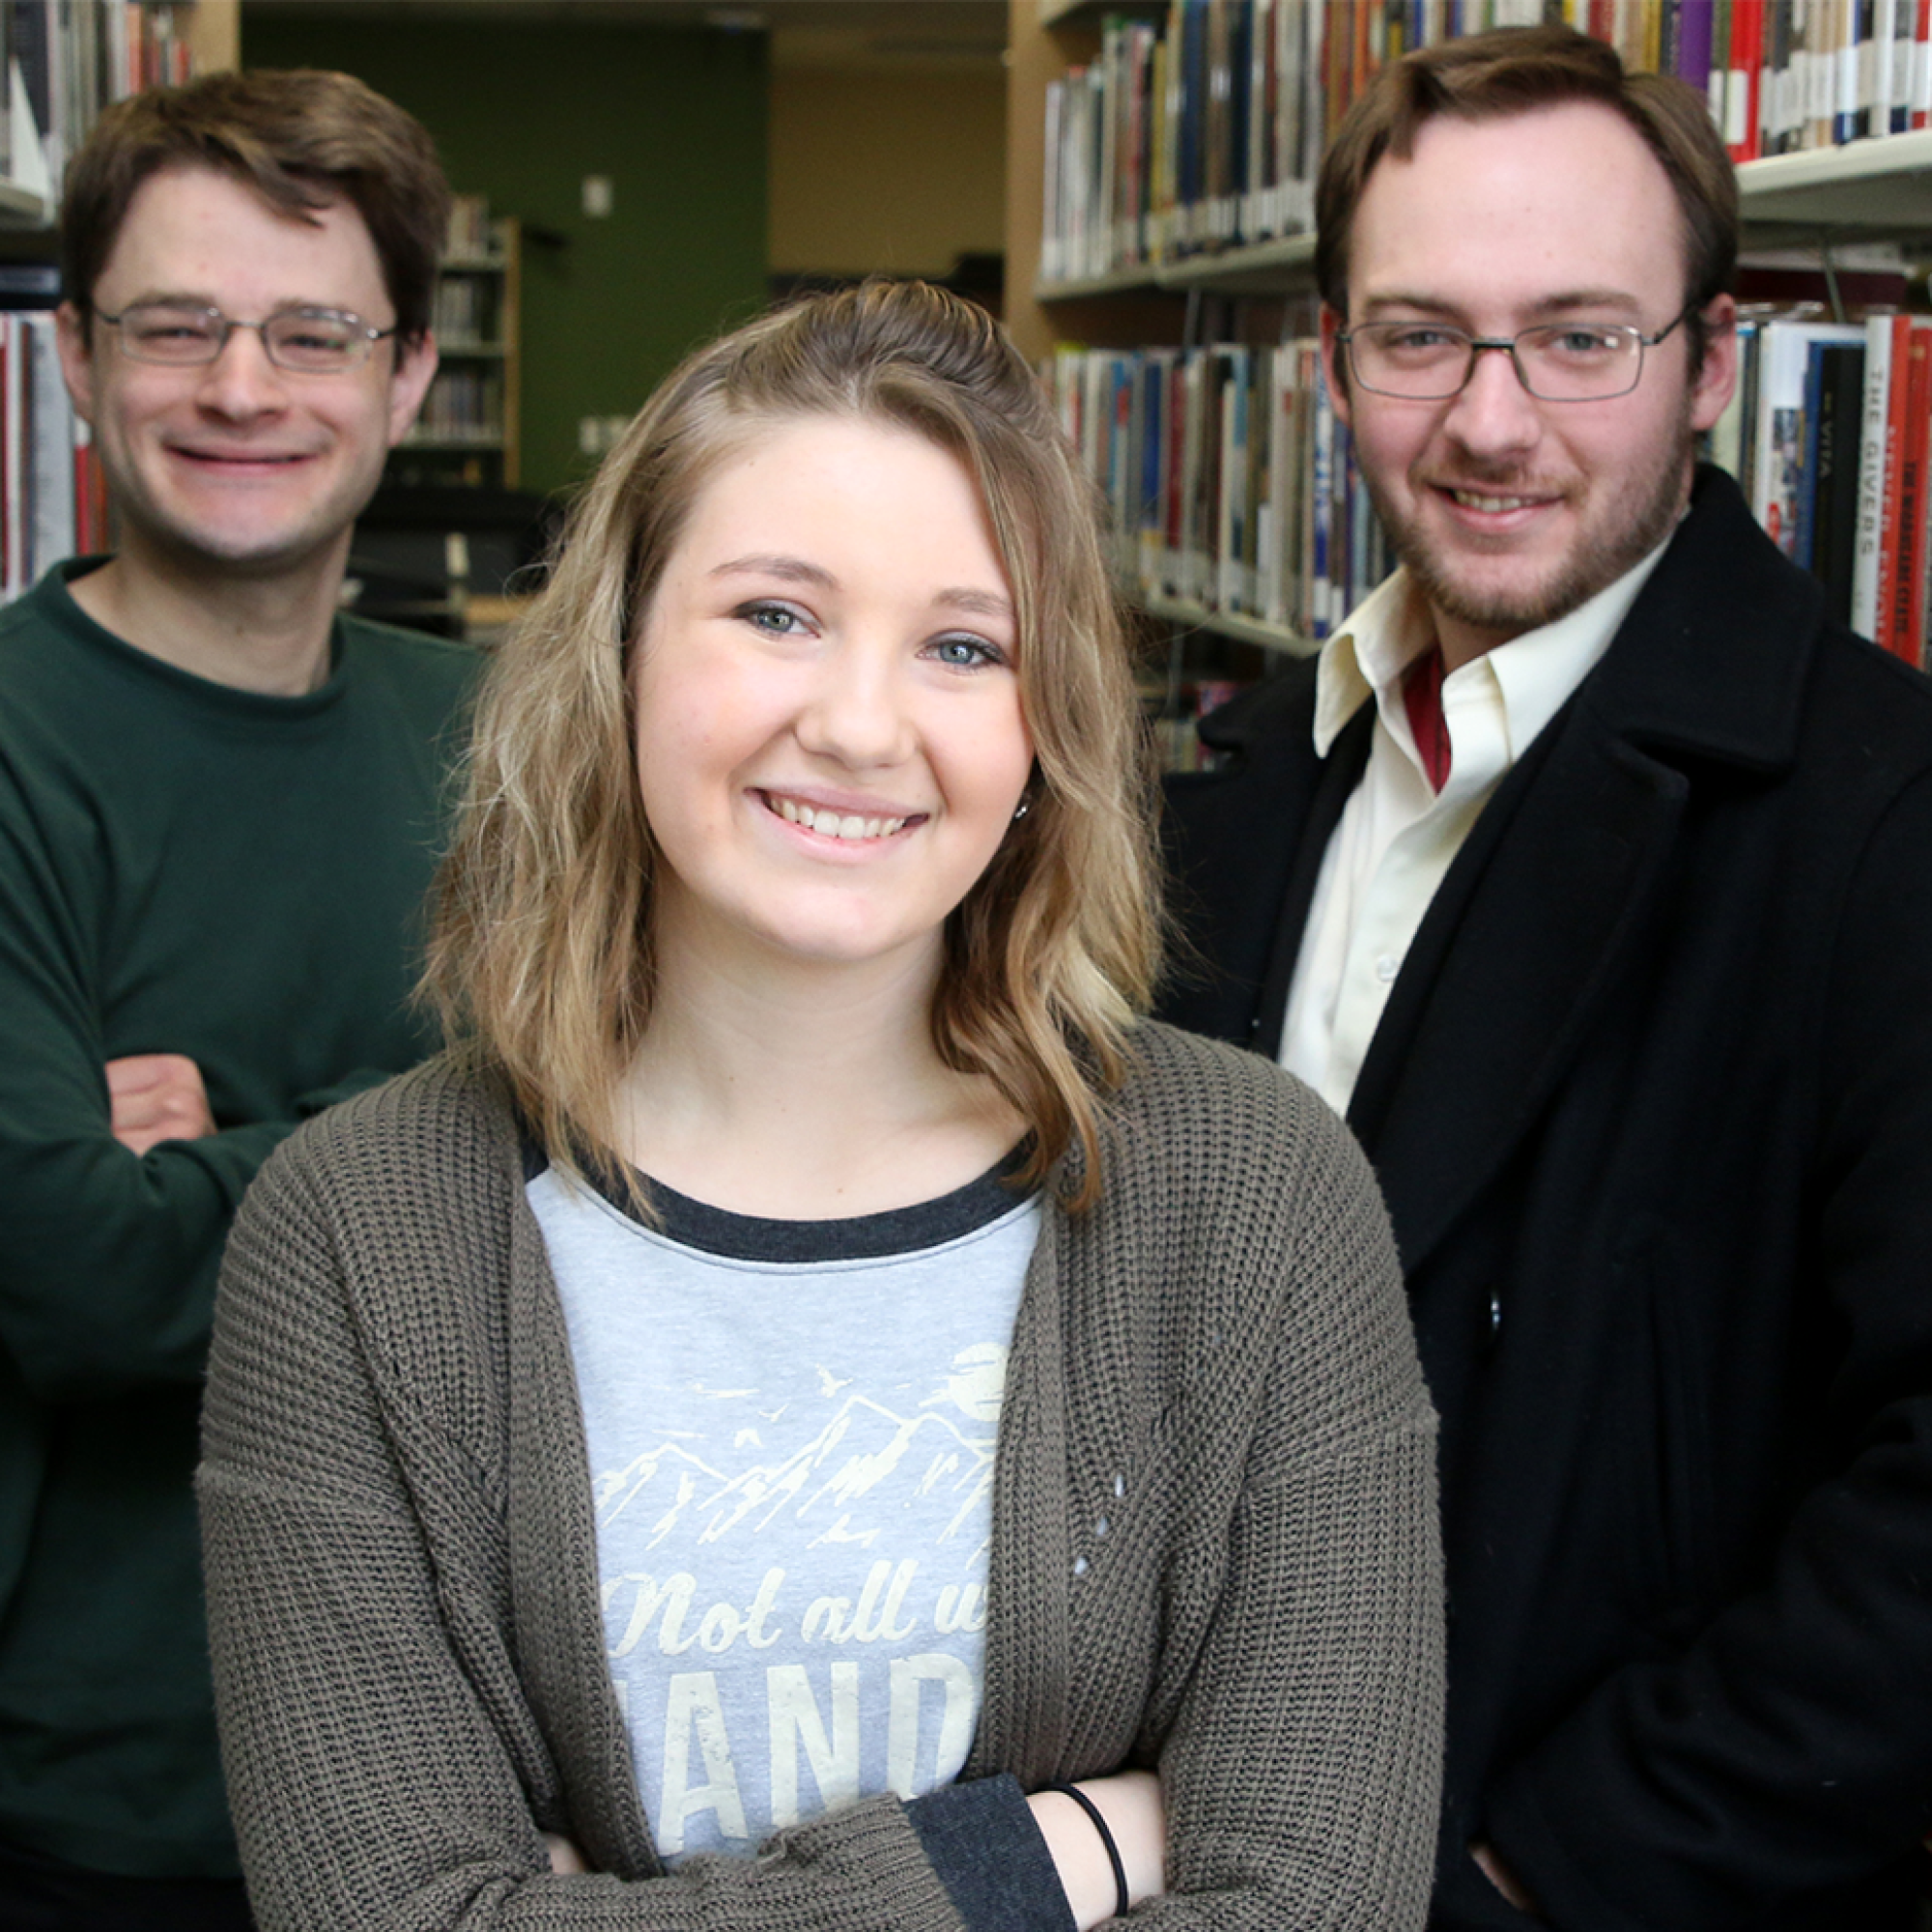 Three CWI students and participants in the Common Read Series event standing in the library. 